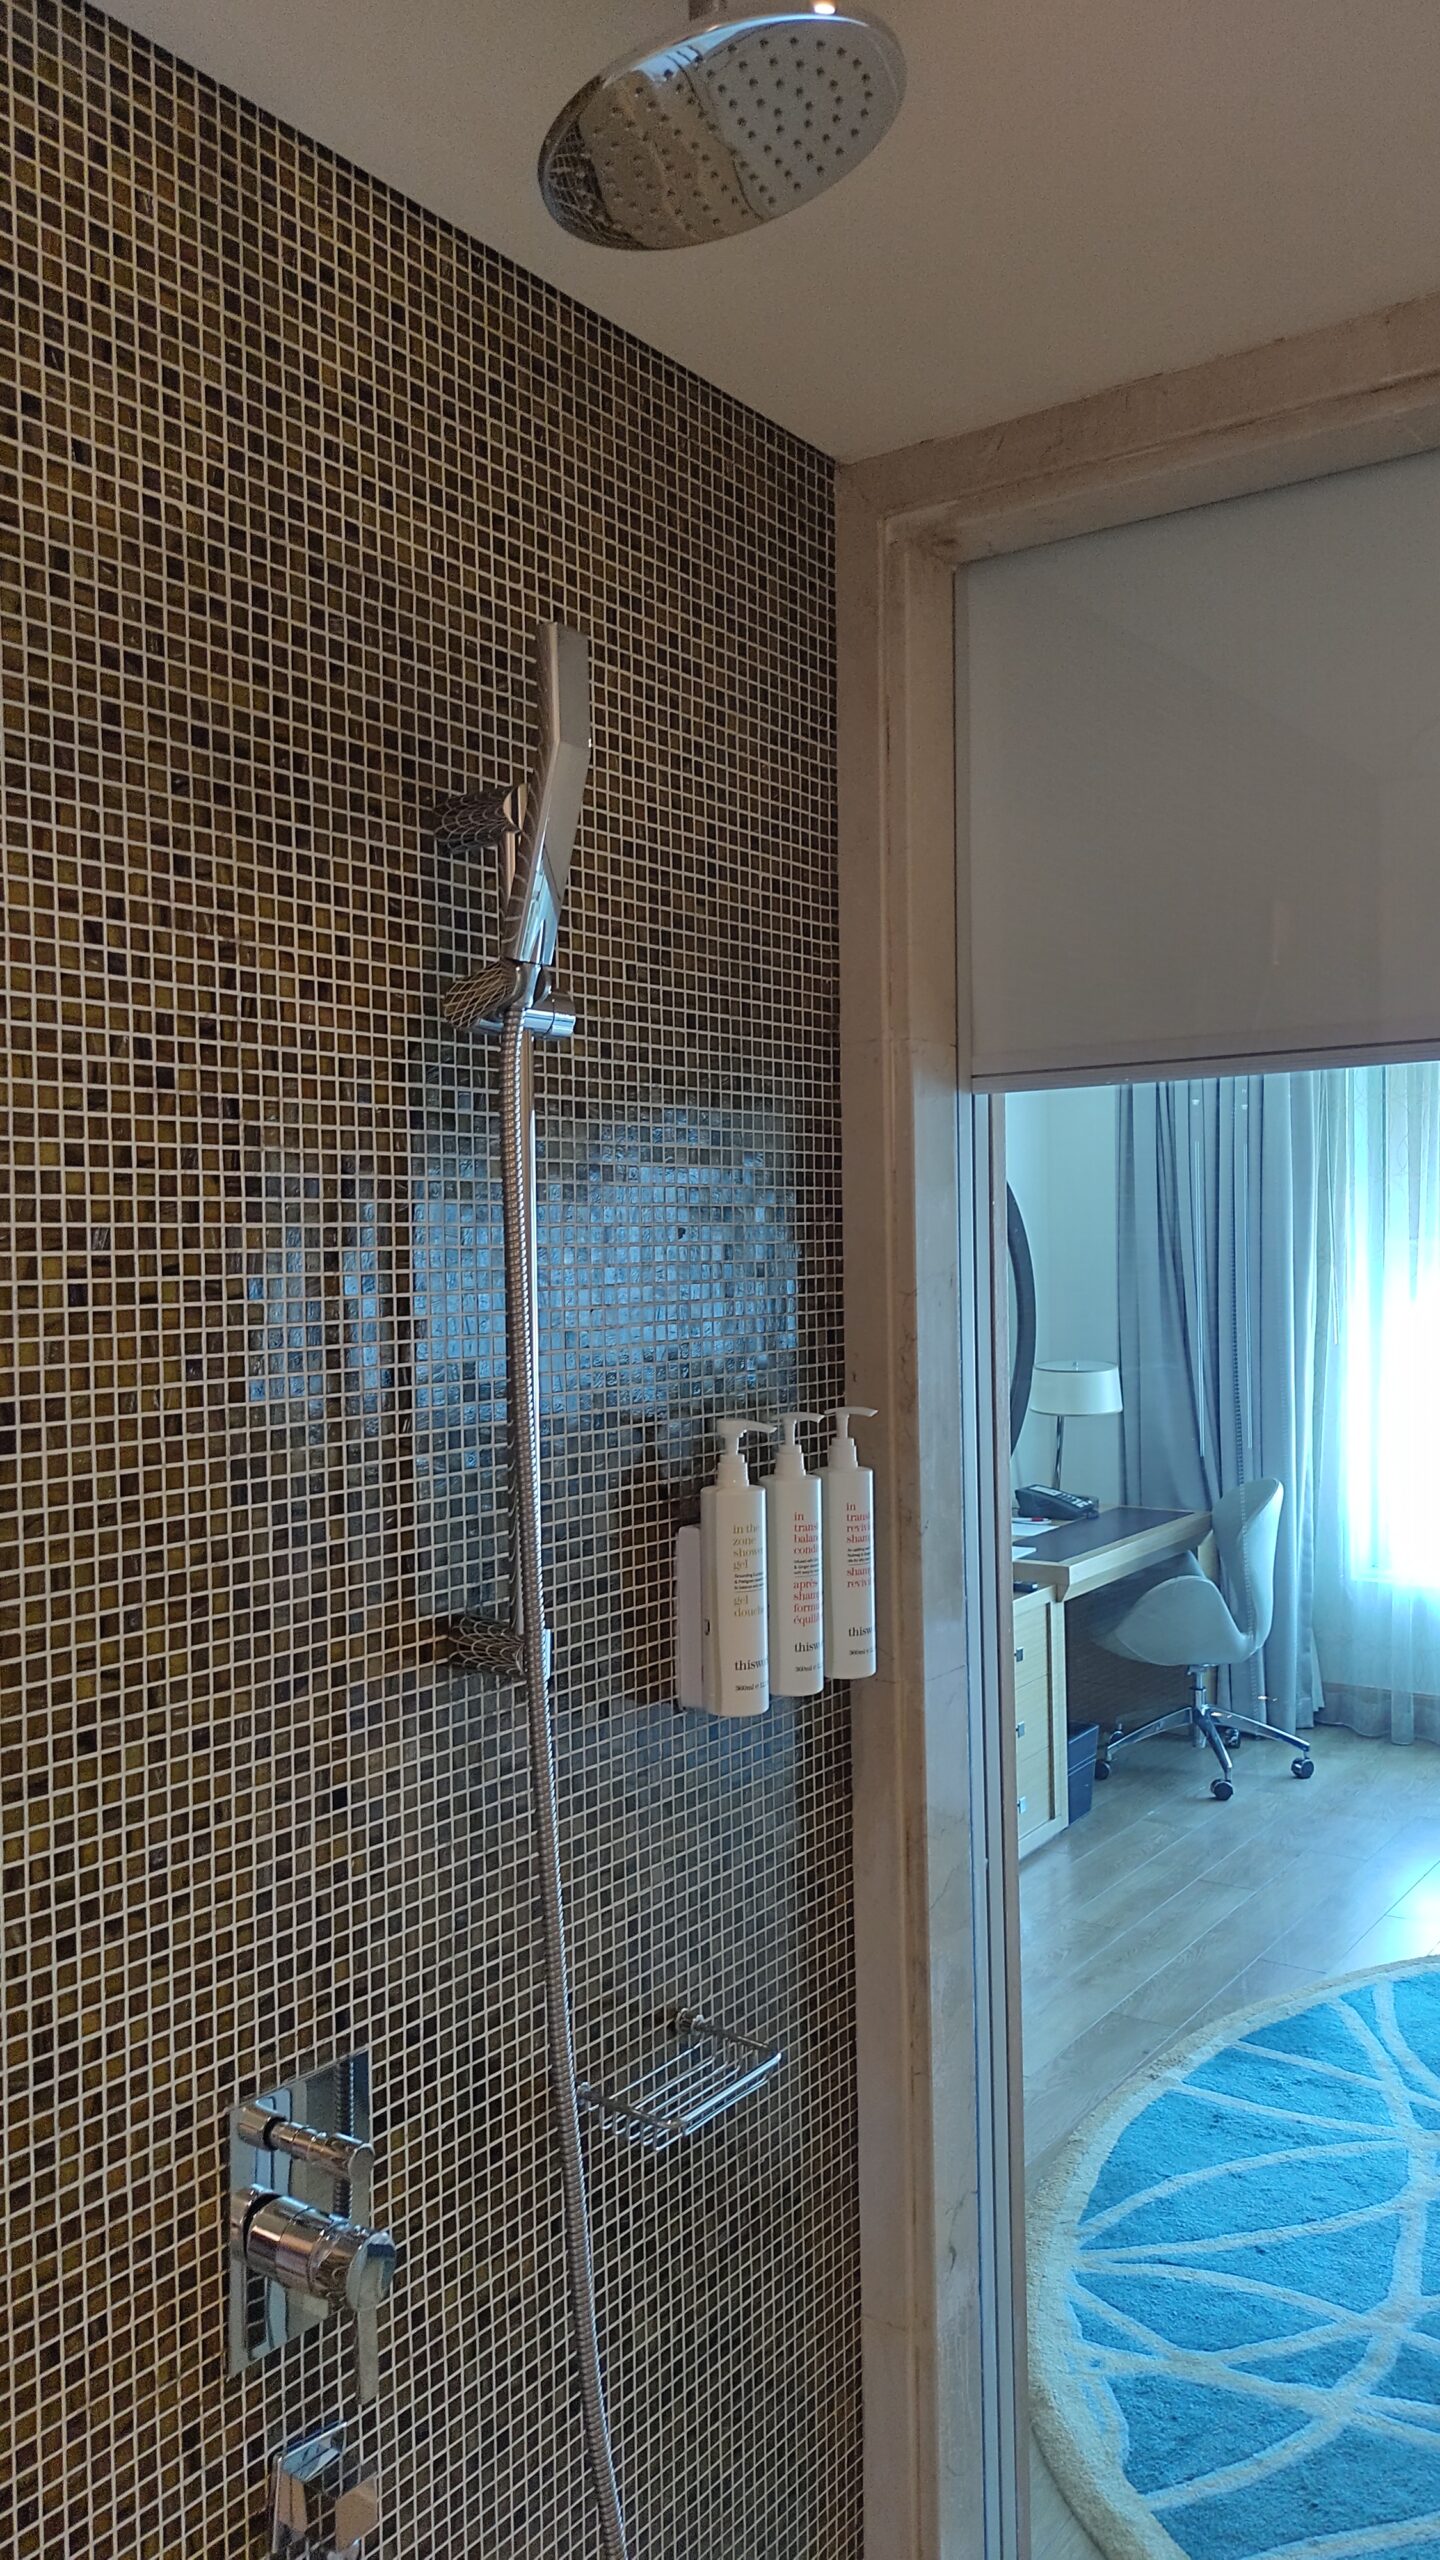 PICTURE OF THE SHOWER WITH A WINDOW LOOKING OUT TO THE ROOM.